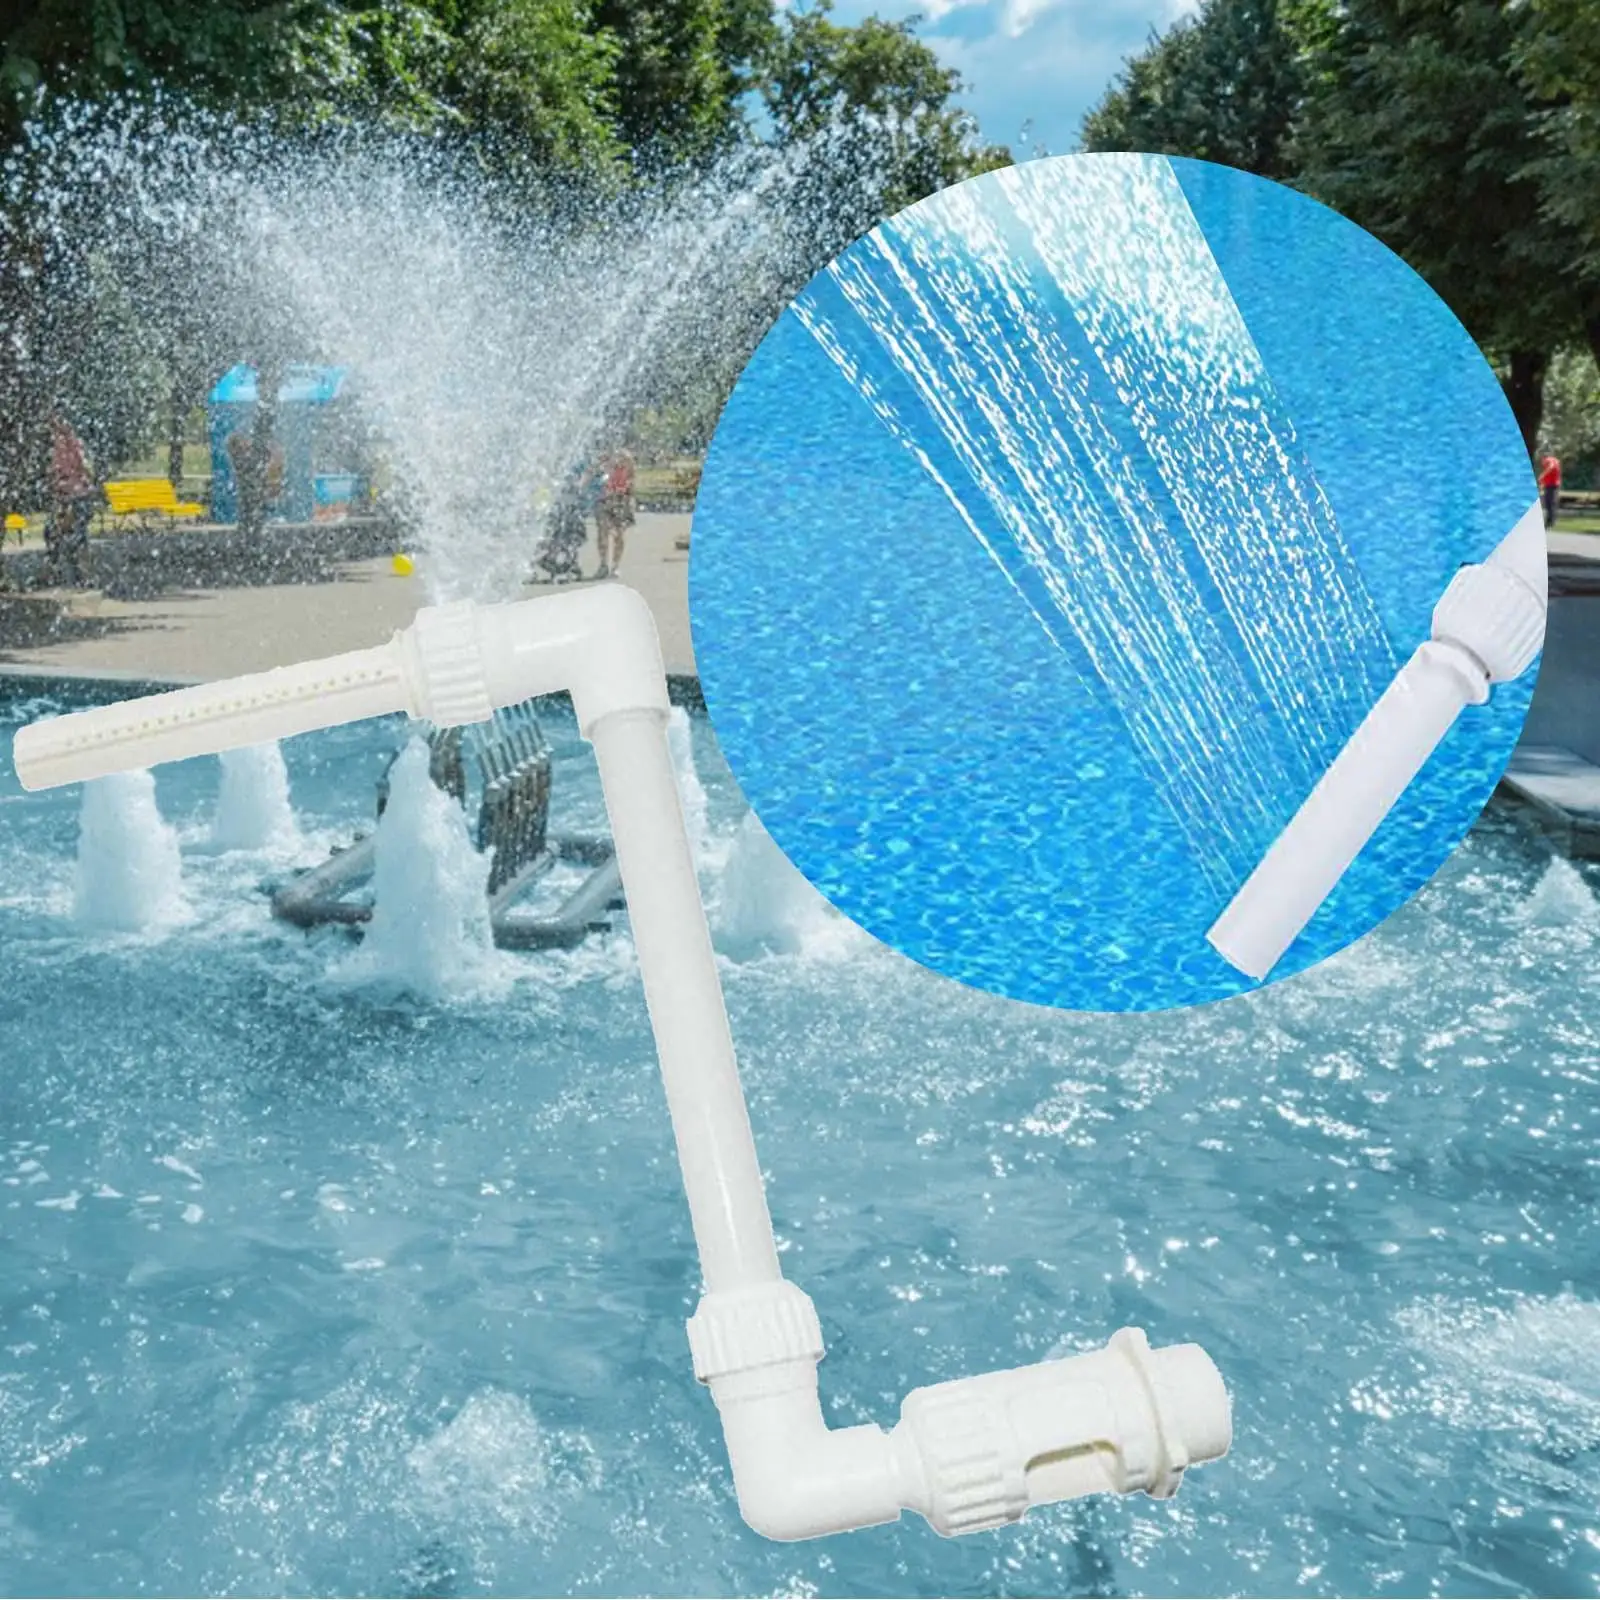 Cooling Aerator Adjustable Pool Aerator Pool Waterfall Spray for Backyard in Ground SPA Outdoor above Ground